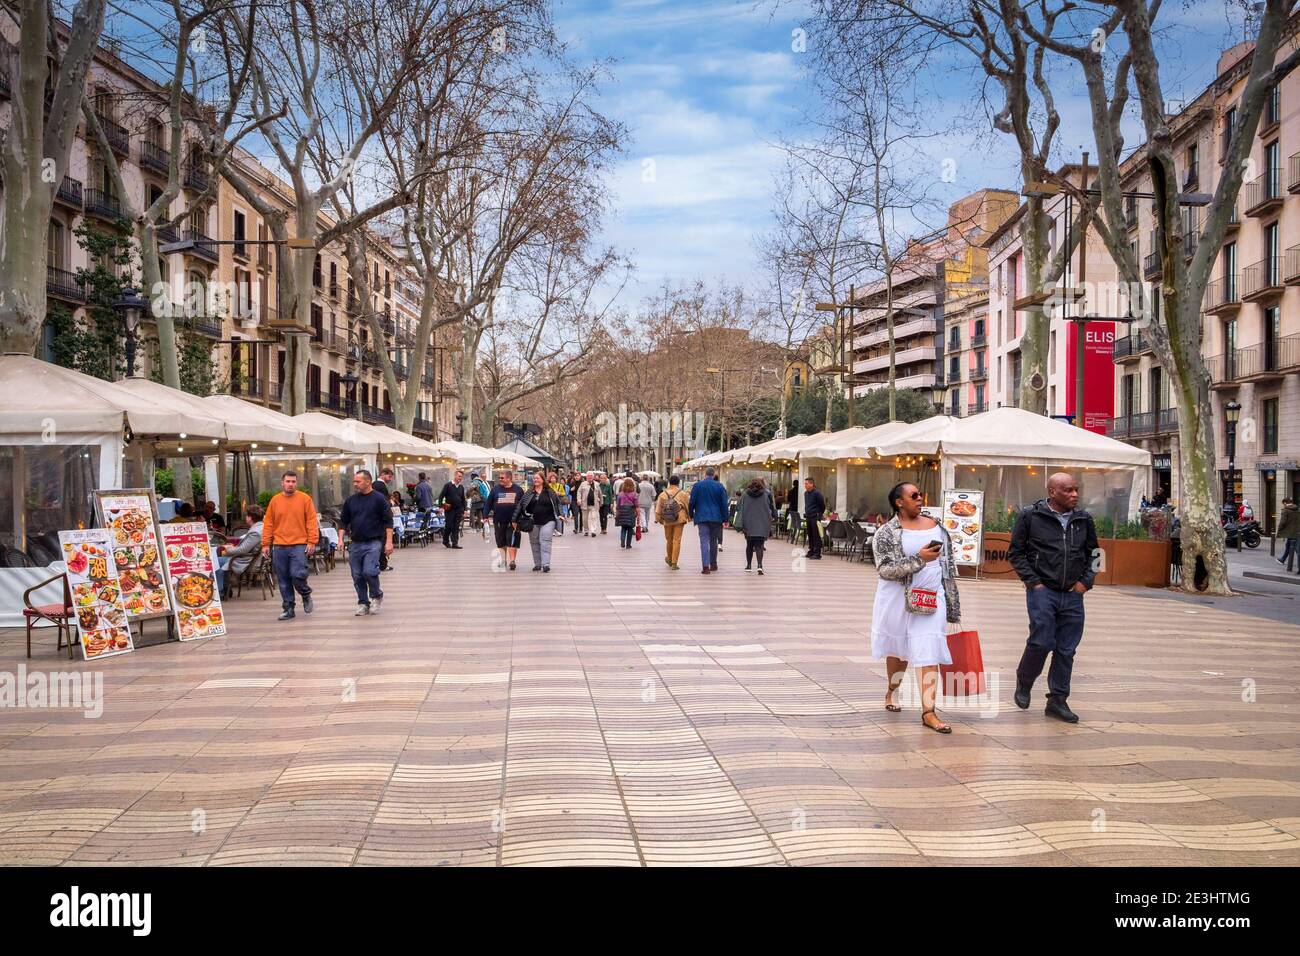 4 March 2020: Barcelona, Spain - La Rambla, a pedestrian avenue with cafes, market stalls, and entertainments, a mecca for visitors to Barcelona, Cata Stock Photo